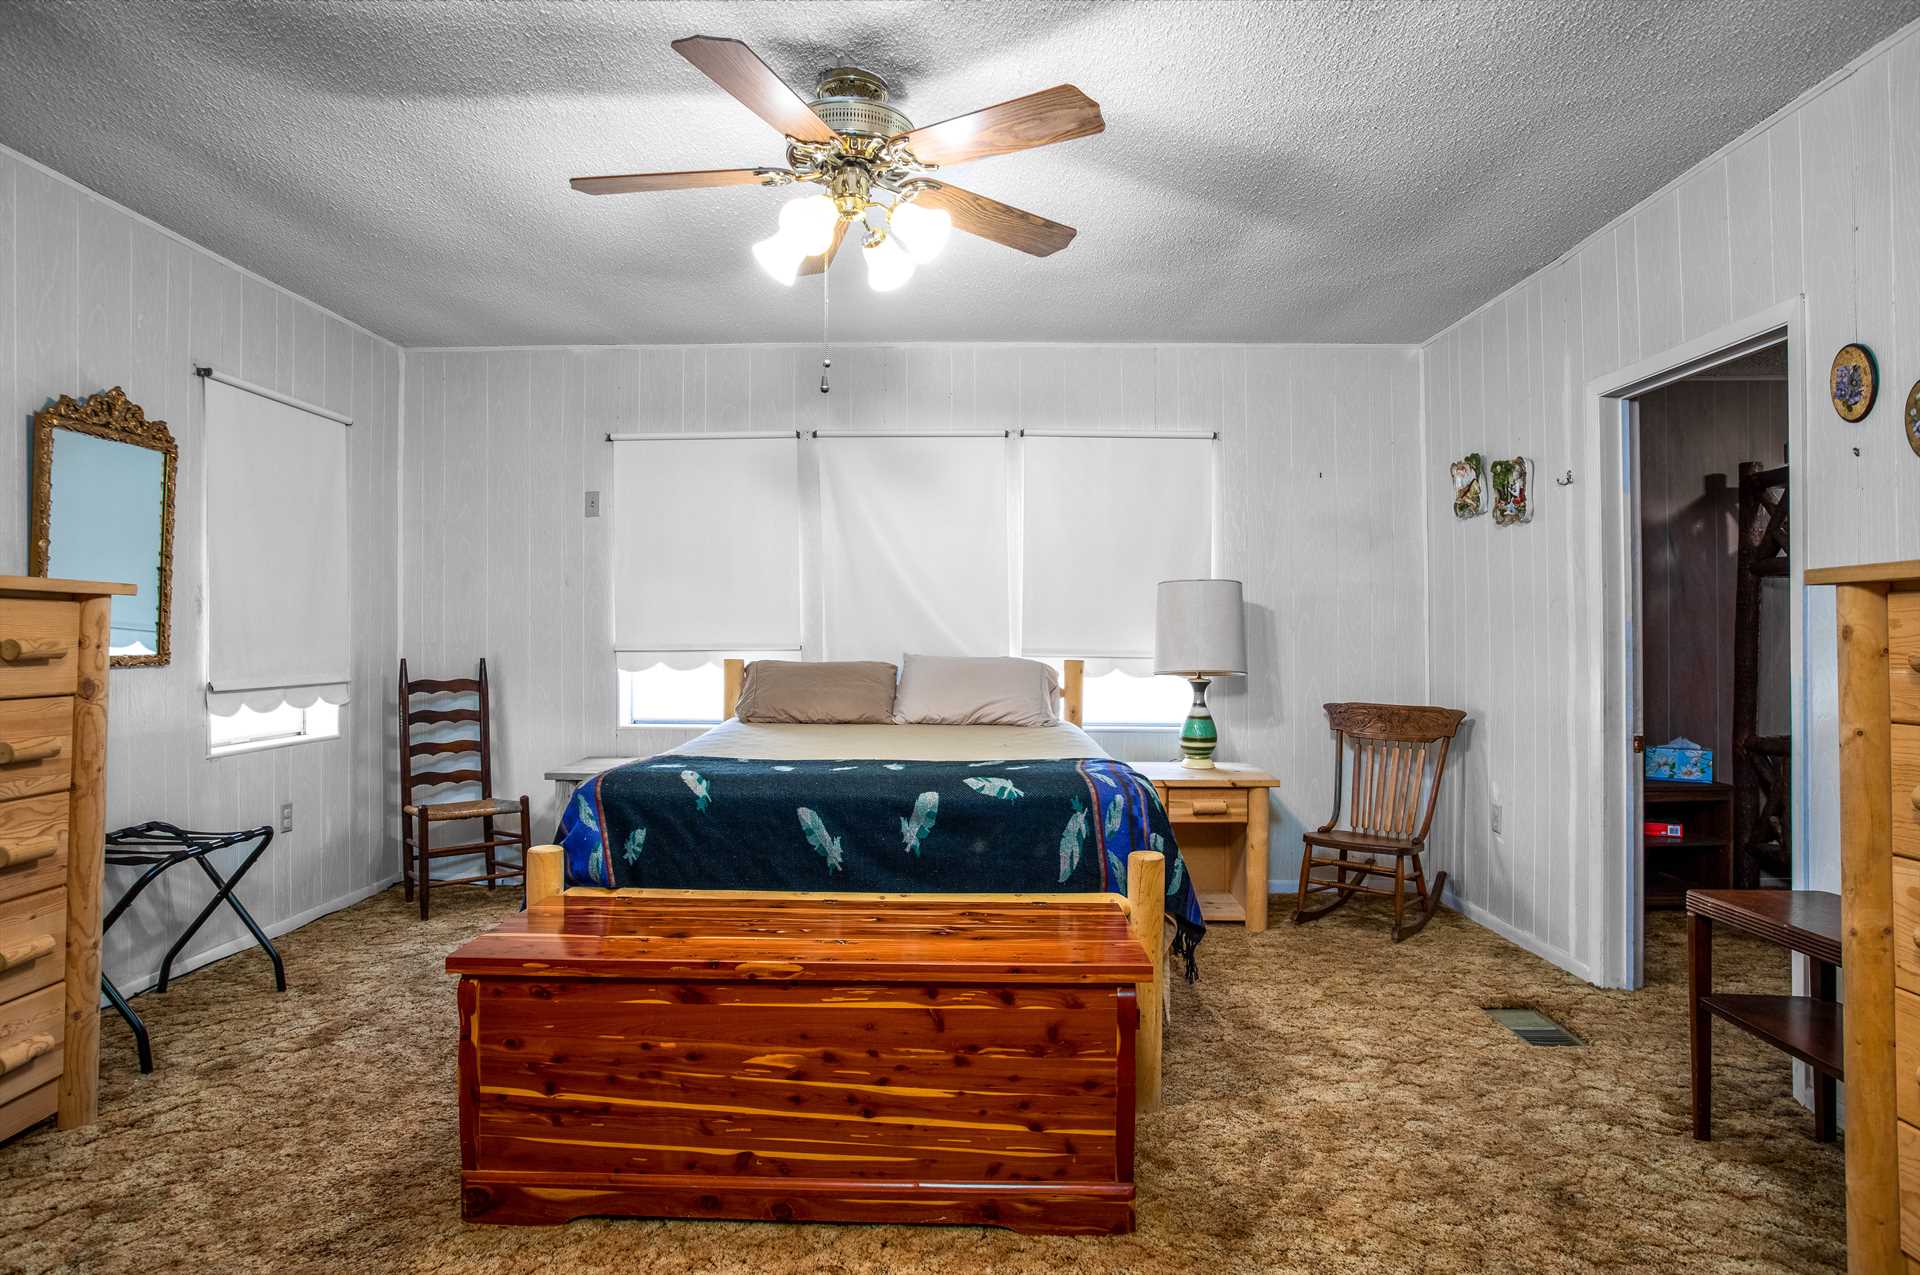                                                 With five spacious bedrooms, the 3H Ranch Mountain Retreat offers restful slumber for up to 17 people!